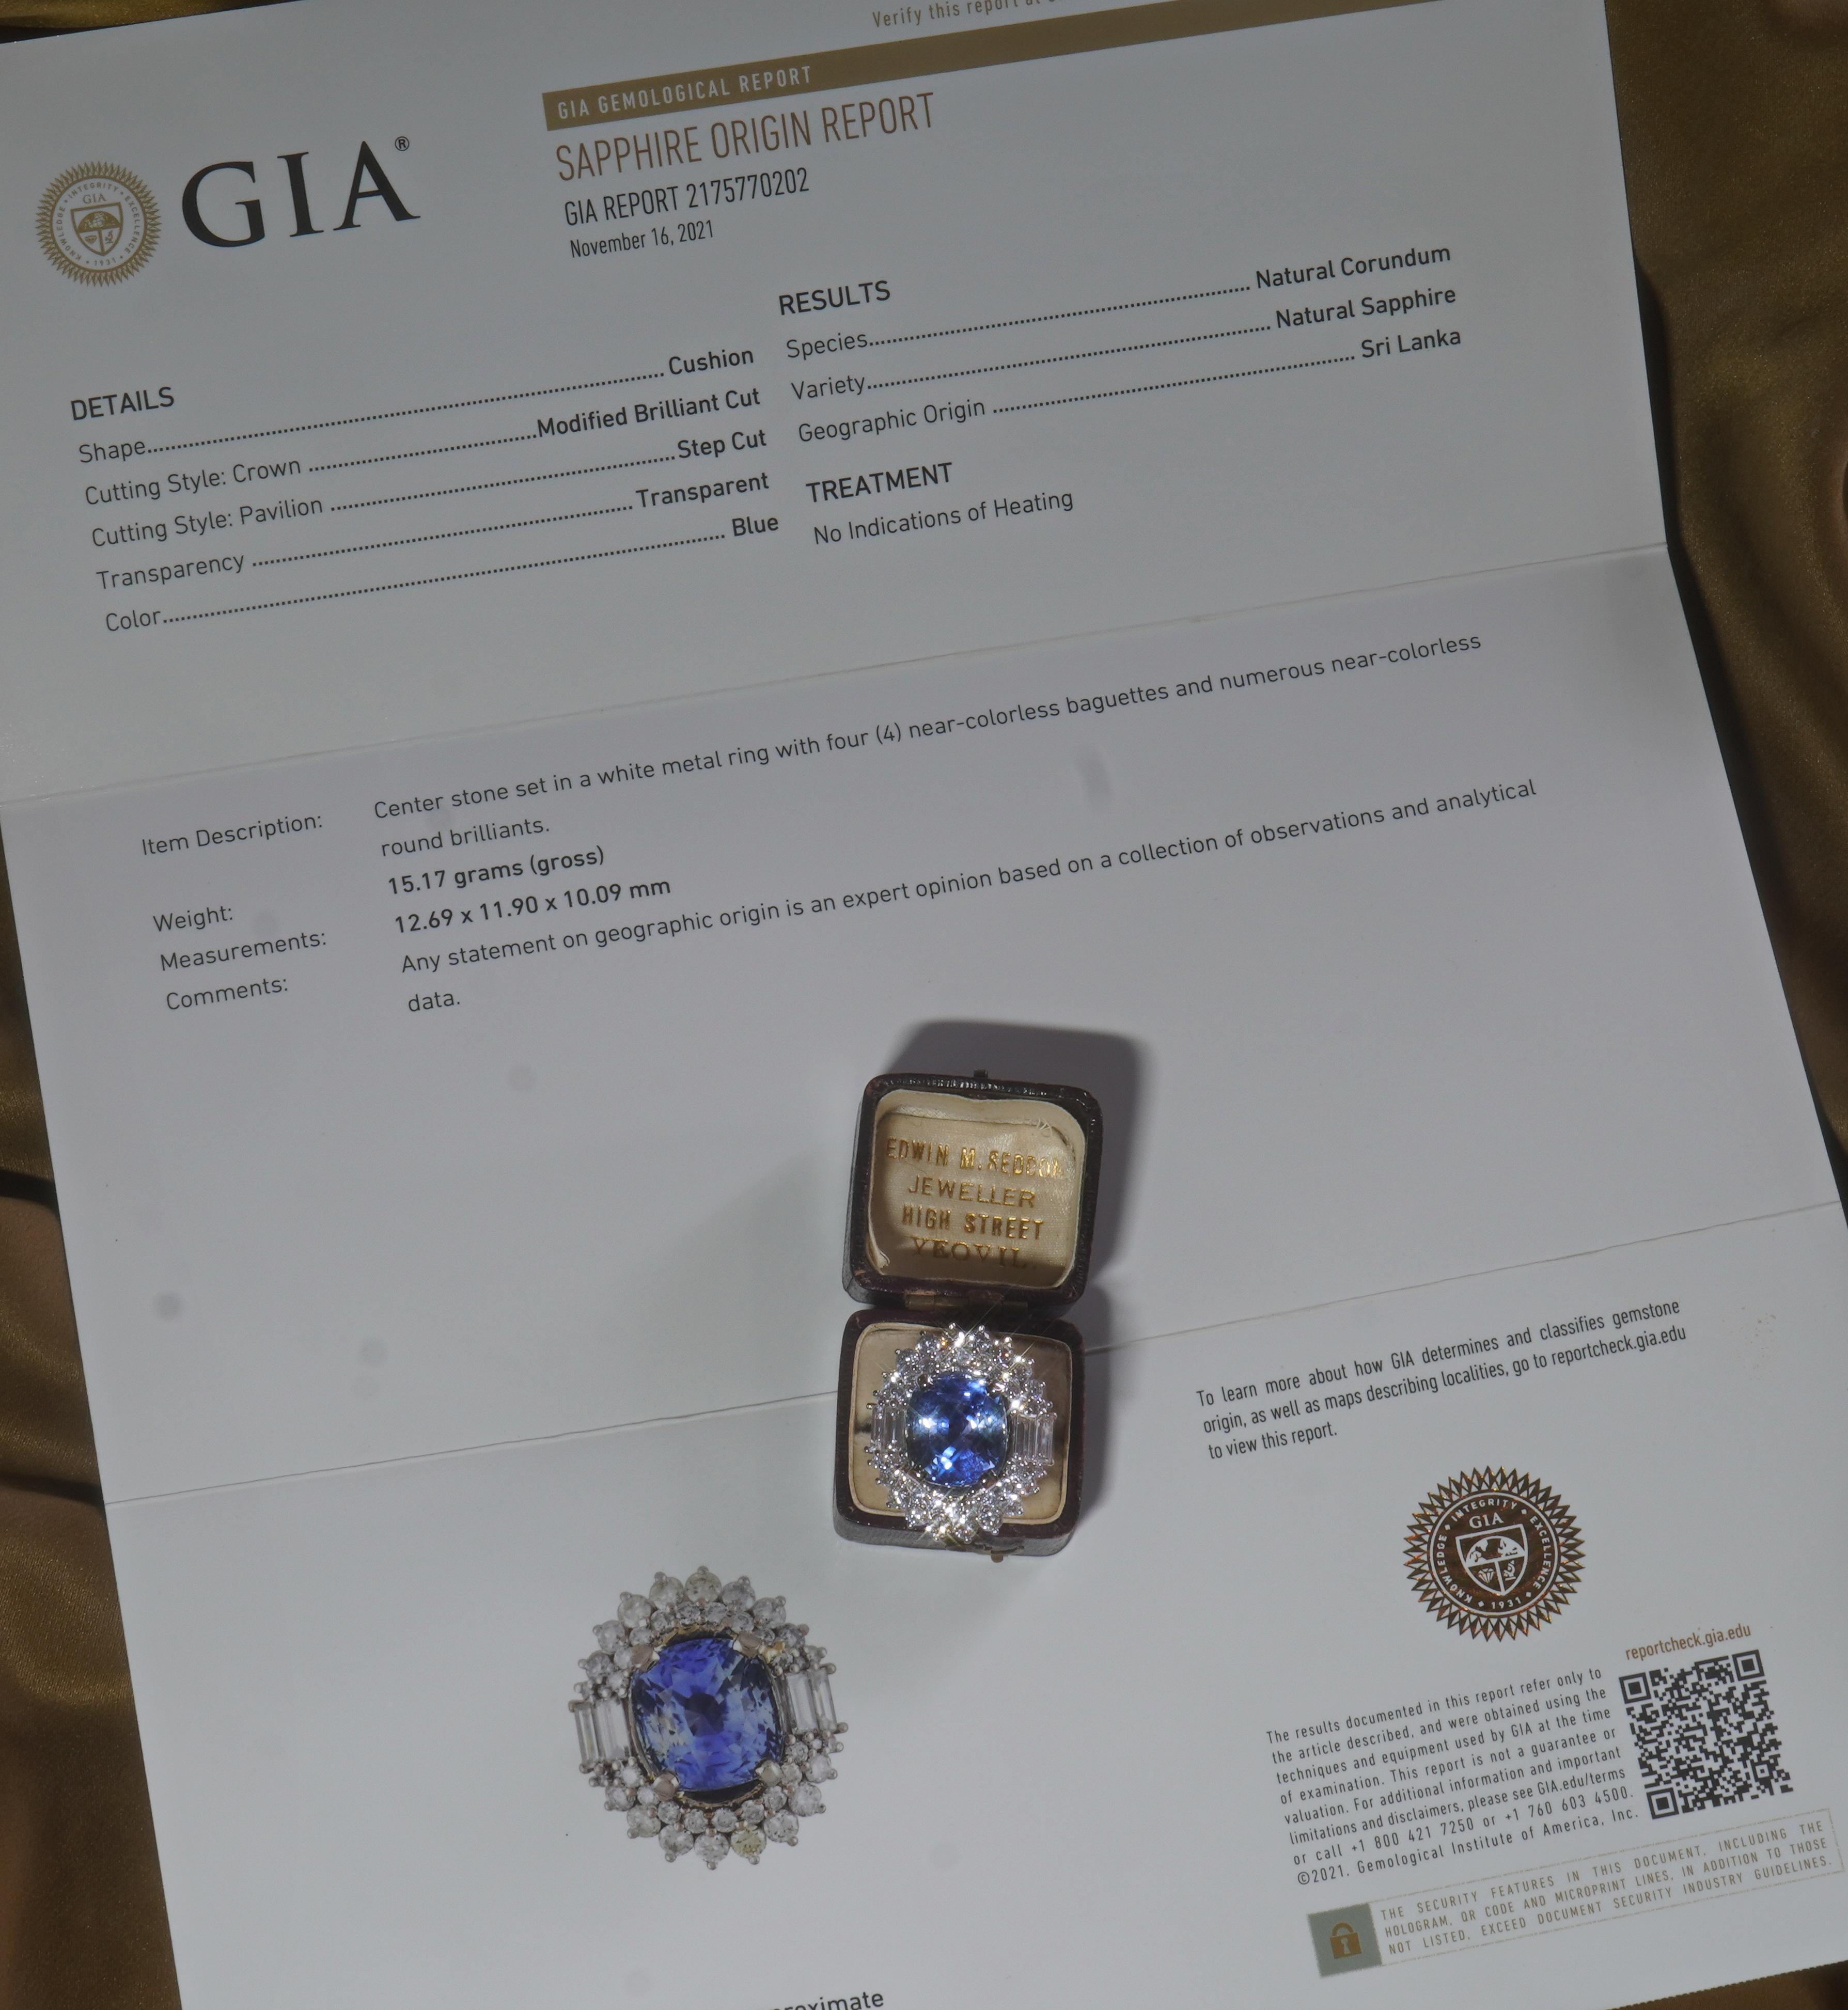 Old South Jewels proudly presents... VINTAGE LUXURY.   GIA CERTIFIED 18K GOLD HUGE 18.38 CARAT UNHEATED SAPPHIRE DIAMOND ANTIQUE RING & BOX!   HUGE 15.02 CARAT GORGEOUS CORNFLOWER BLUE GIA CERTIFIED RARE NO HEAT NATURAL SAPPHIRE.   This Rare